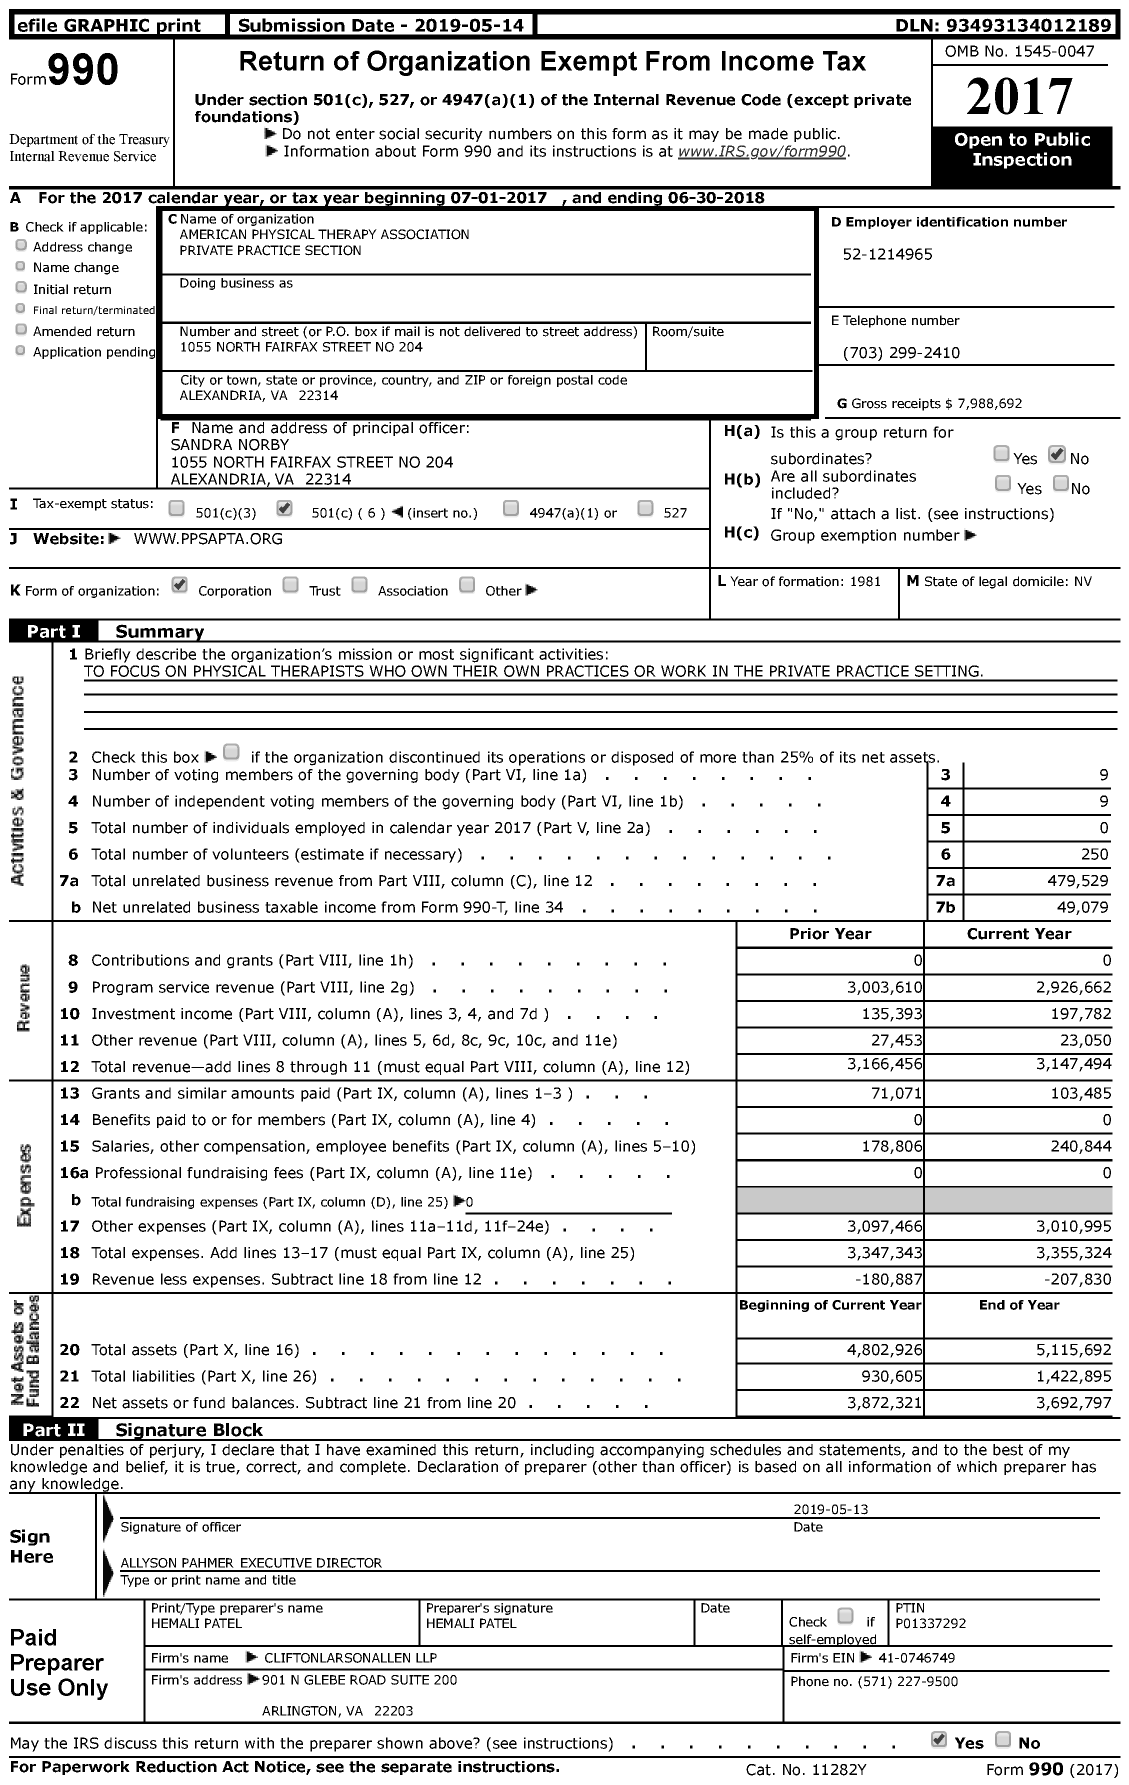 Image of first page of 2017 Form 990 for Private Practice Section (PPS)